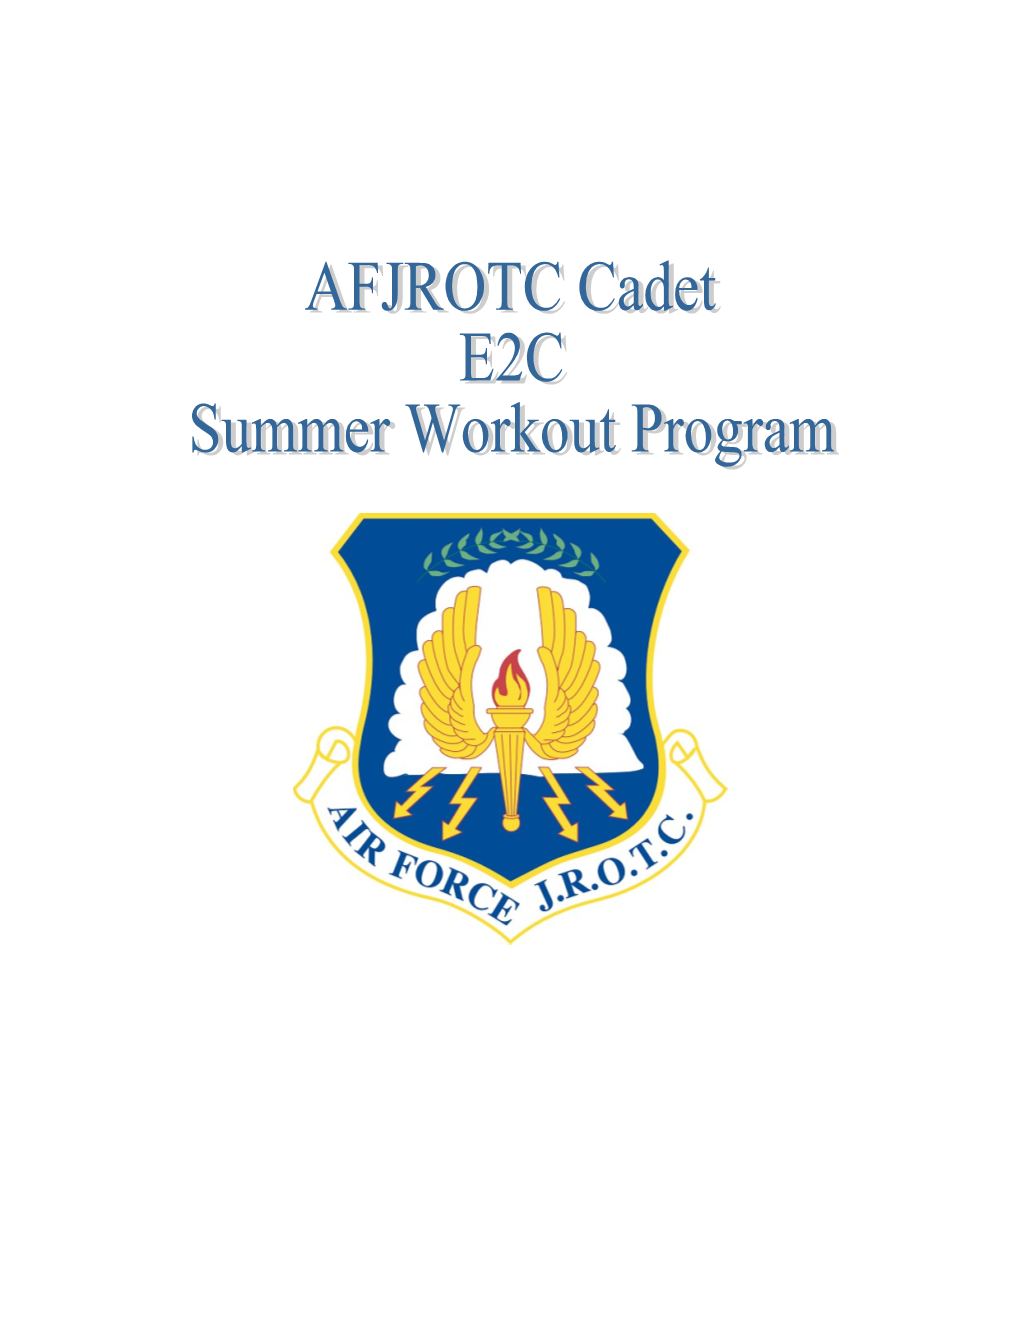 Your Physical Training Program This Summer Should Pick up Where Your E2C Class Left Off